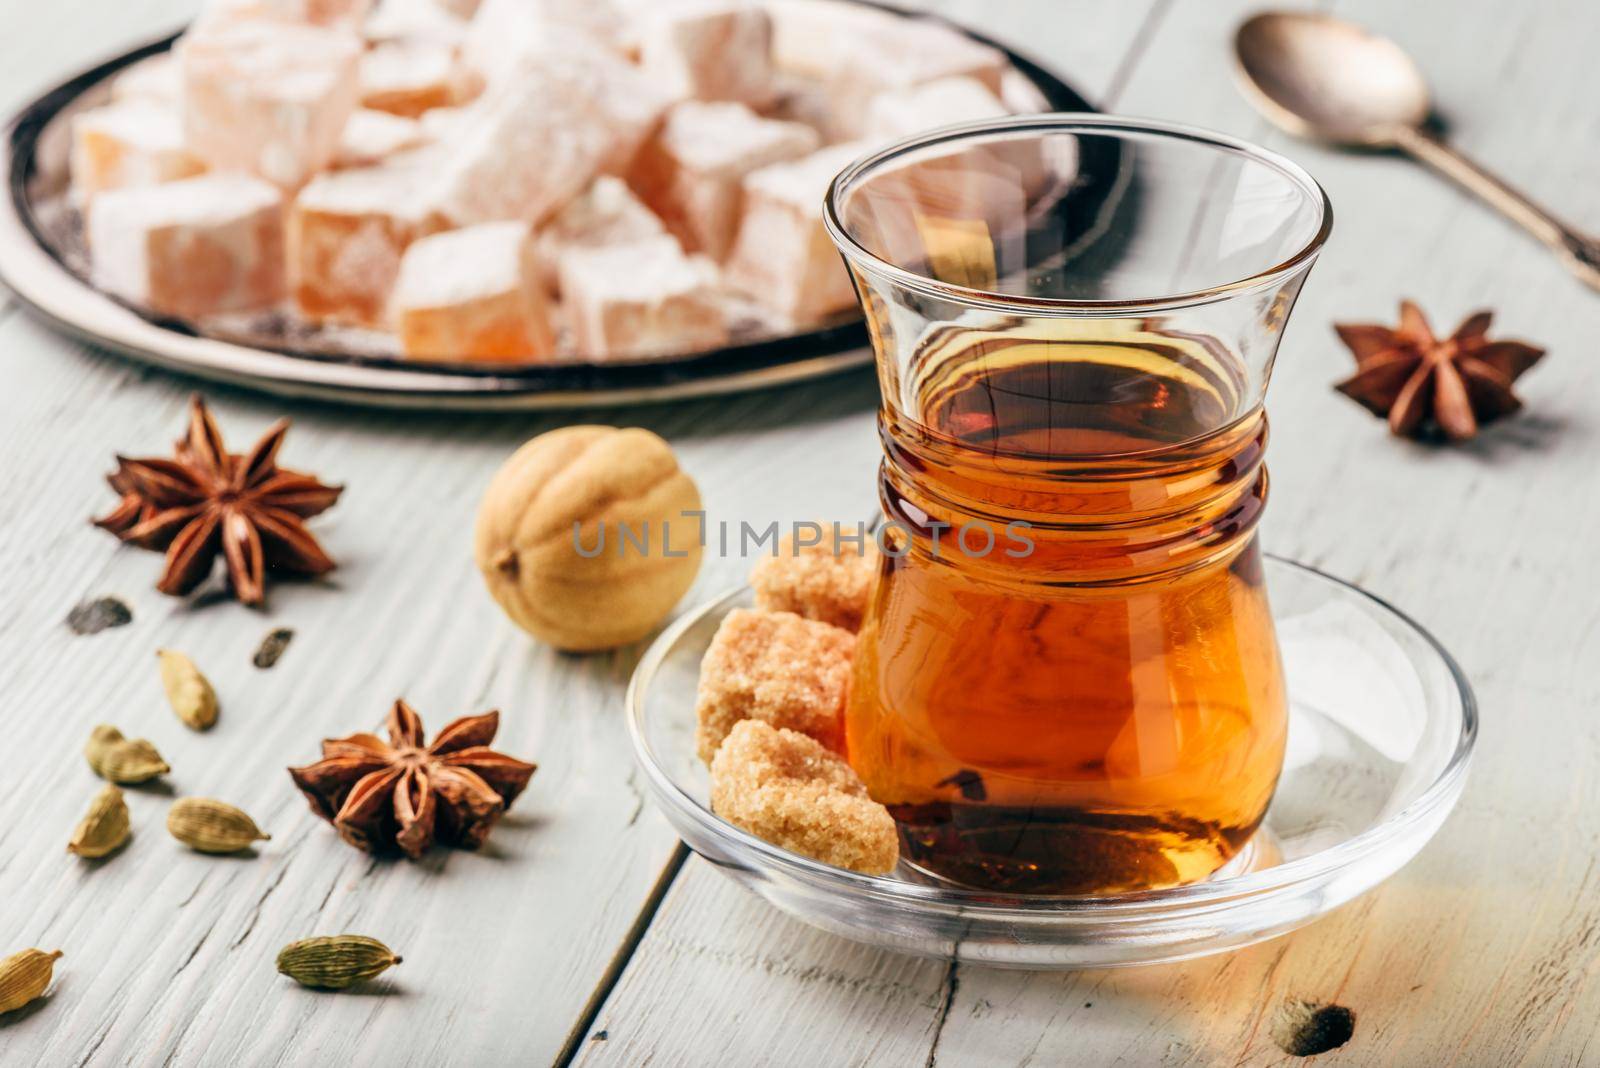 Tea in arab glass with turkish delight Rahat Lokum and different spices over wooden surface